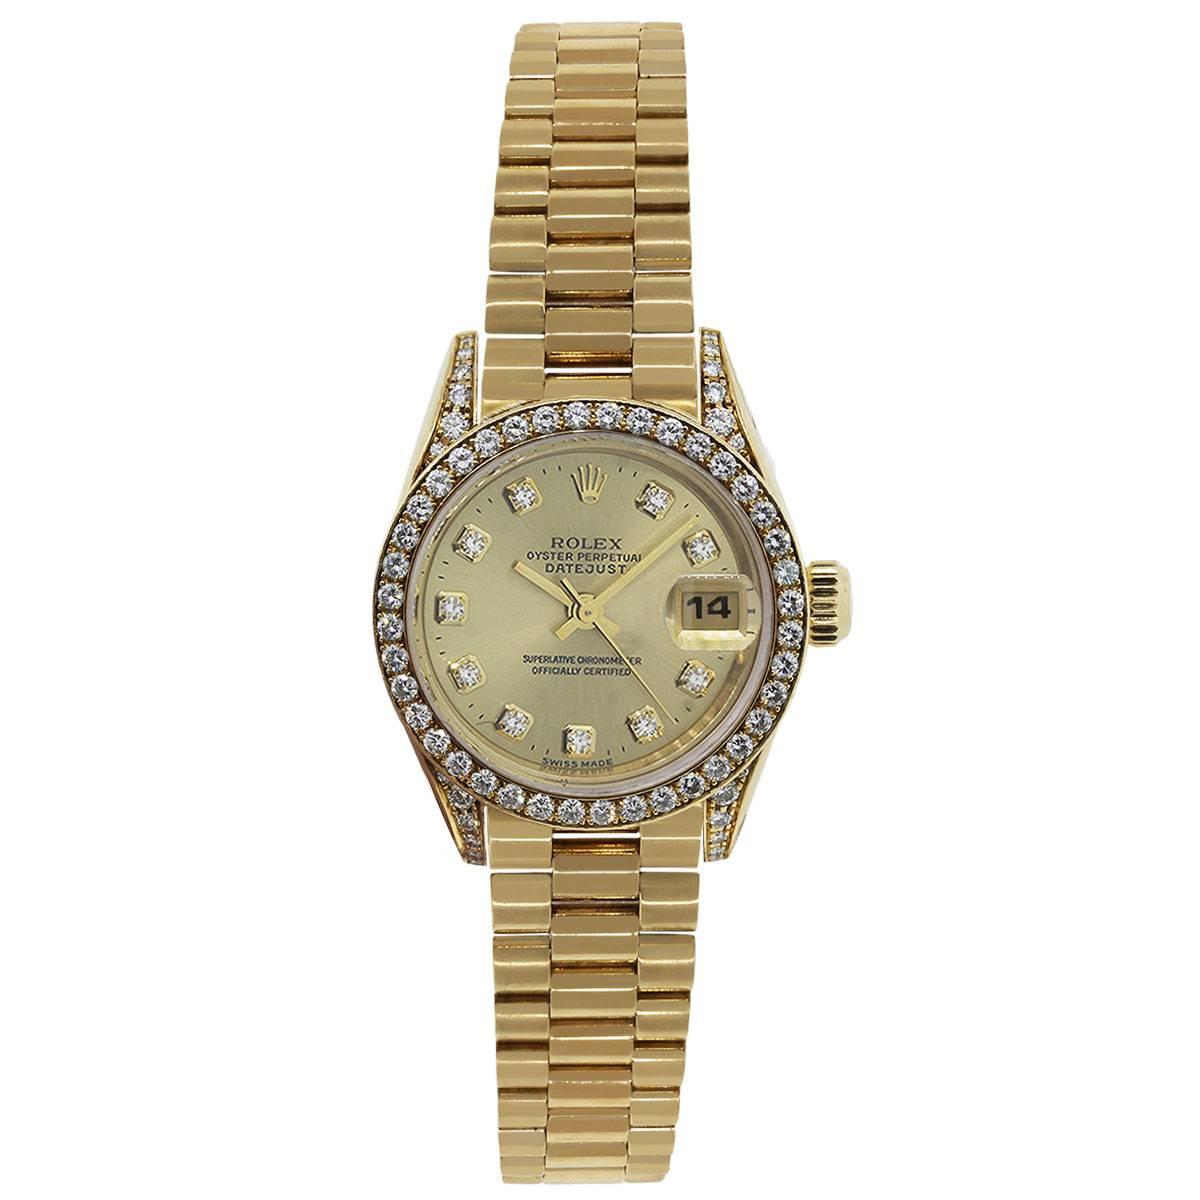 Brand: Rolex
MPN: Datejust
Model: 69158
Case Material: 18k Yellow Gold
Case Diameter: 26mm
Crystal: Original Rolex Sapphire Crystal
Bezel: 18k yellow gold diamond bezel (factory) Diamonds are G in color and VS in clarity. Diamonds extend onto case